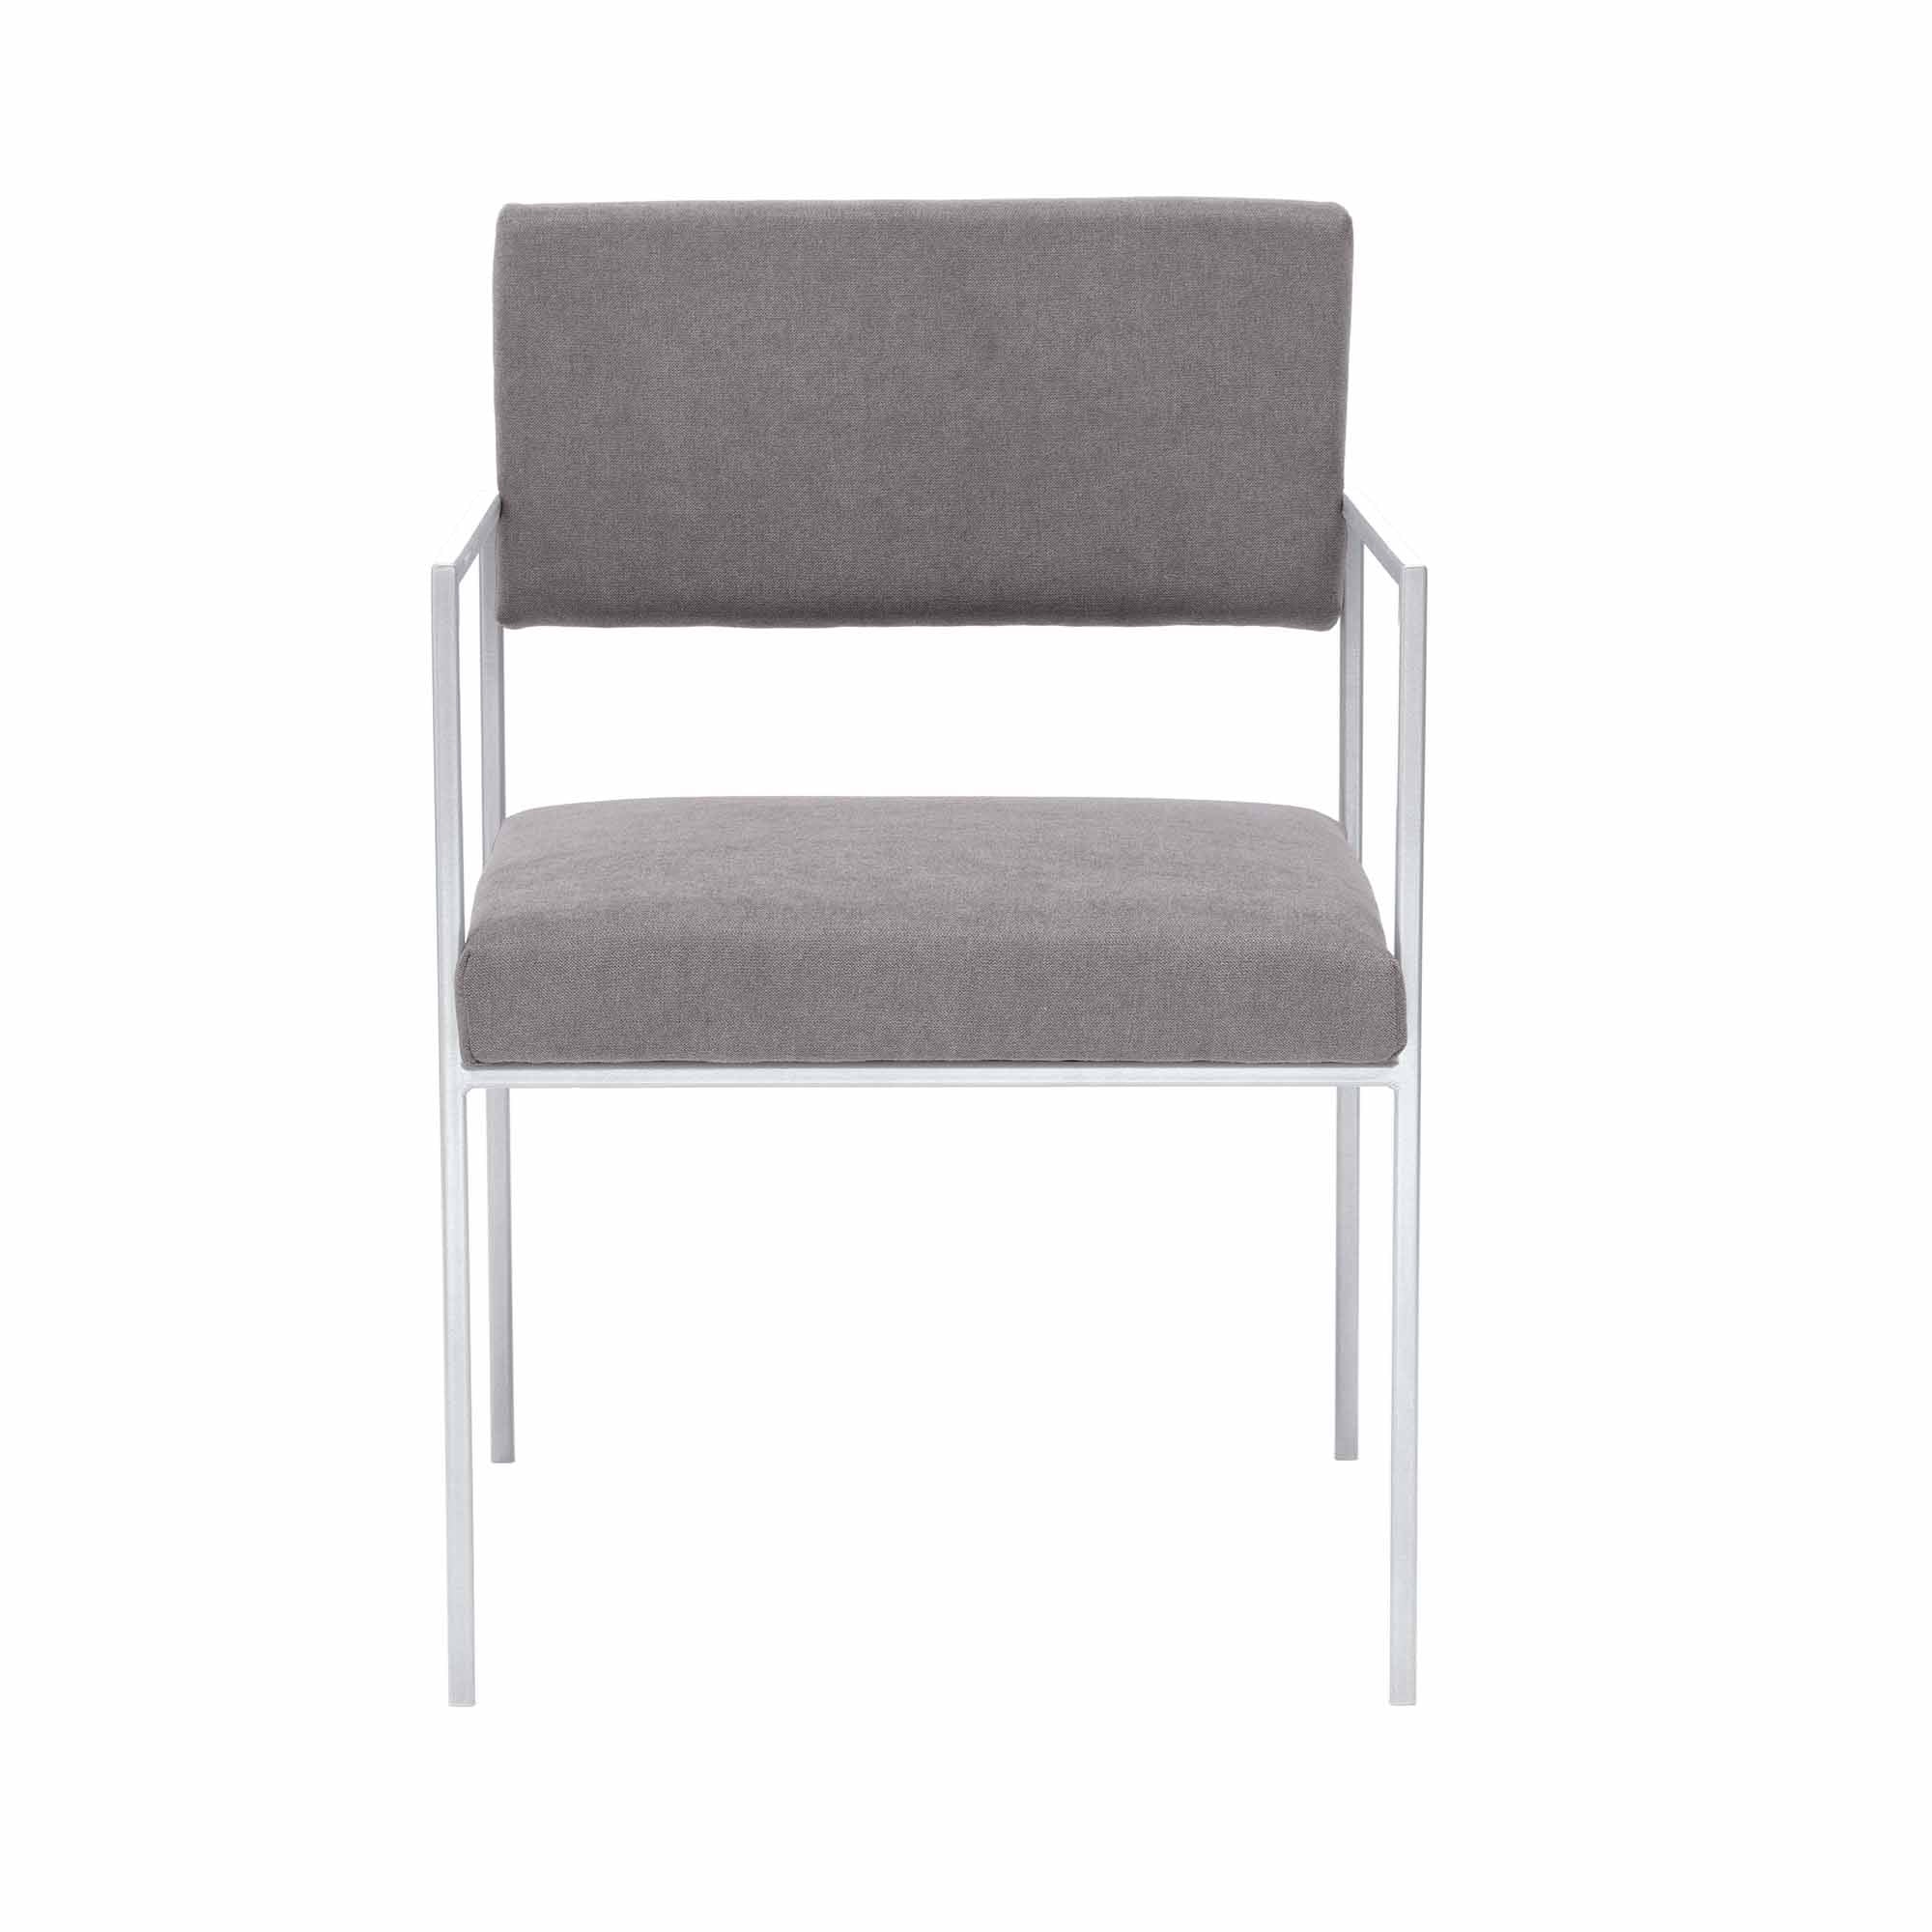 CUBE Armchair, Powder-Coated Steel Frame rey fabric, white frame front view